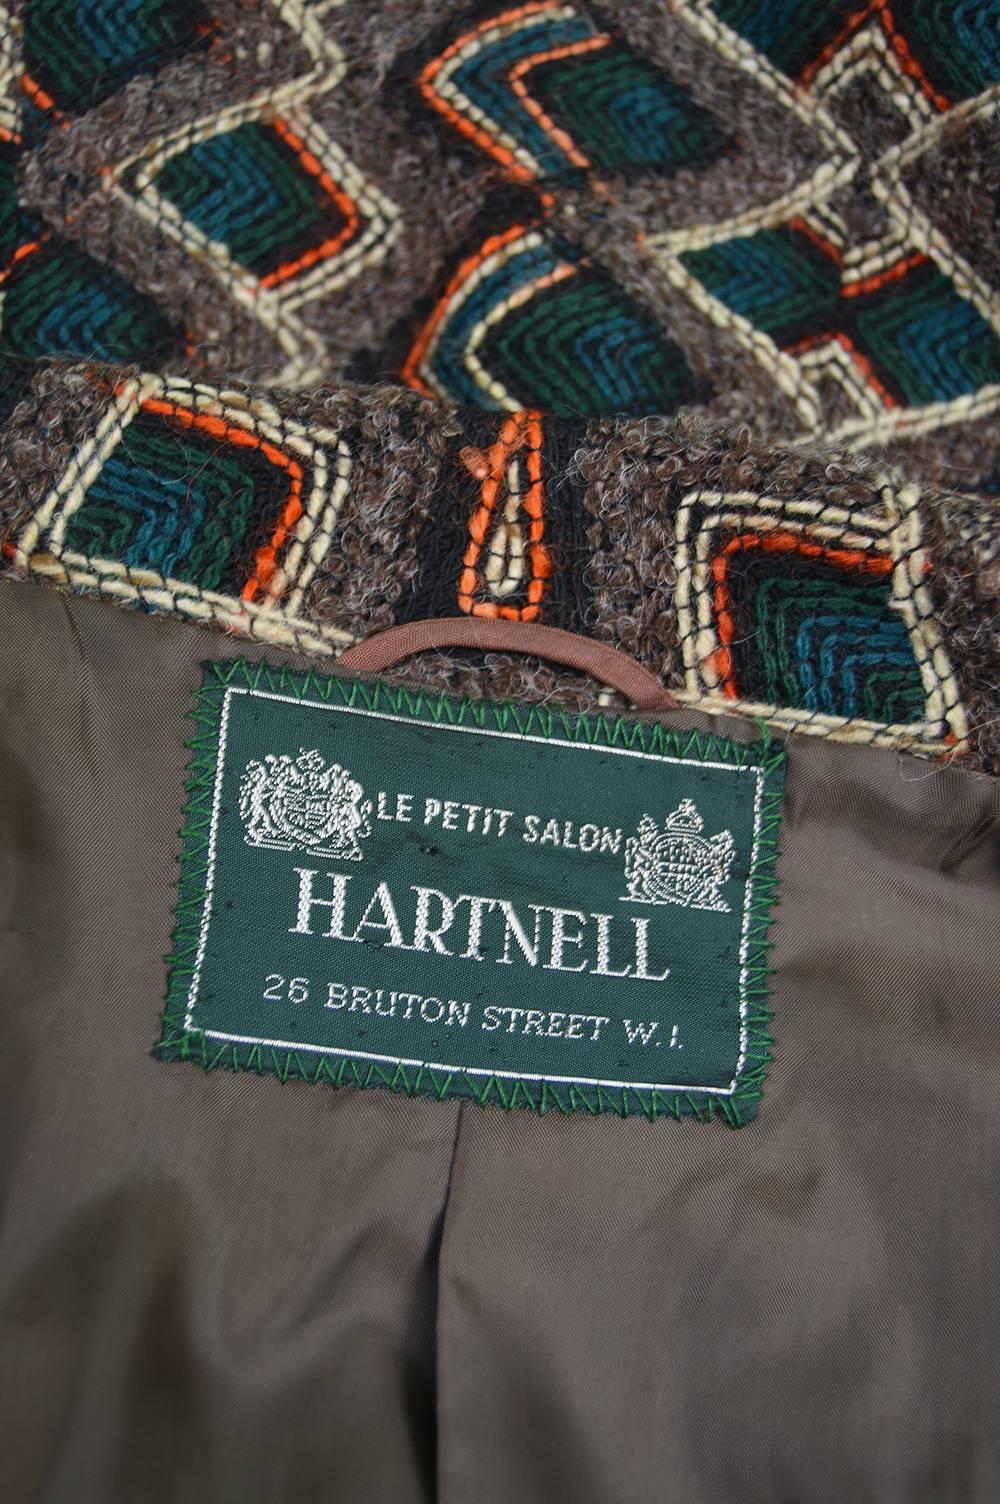 Norman Hartnell Woven Wool & Crepe Jacket, 1960s For Sale 6